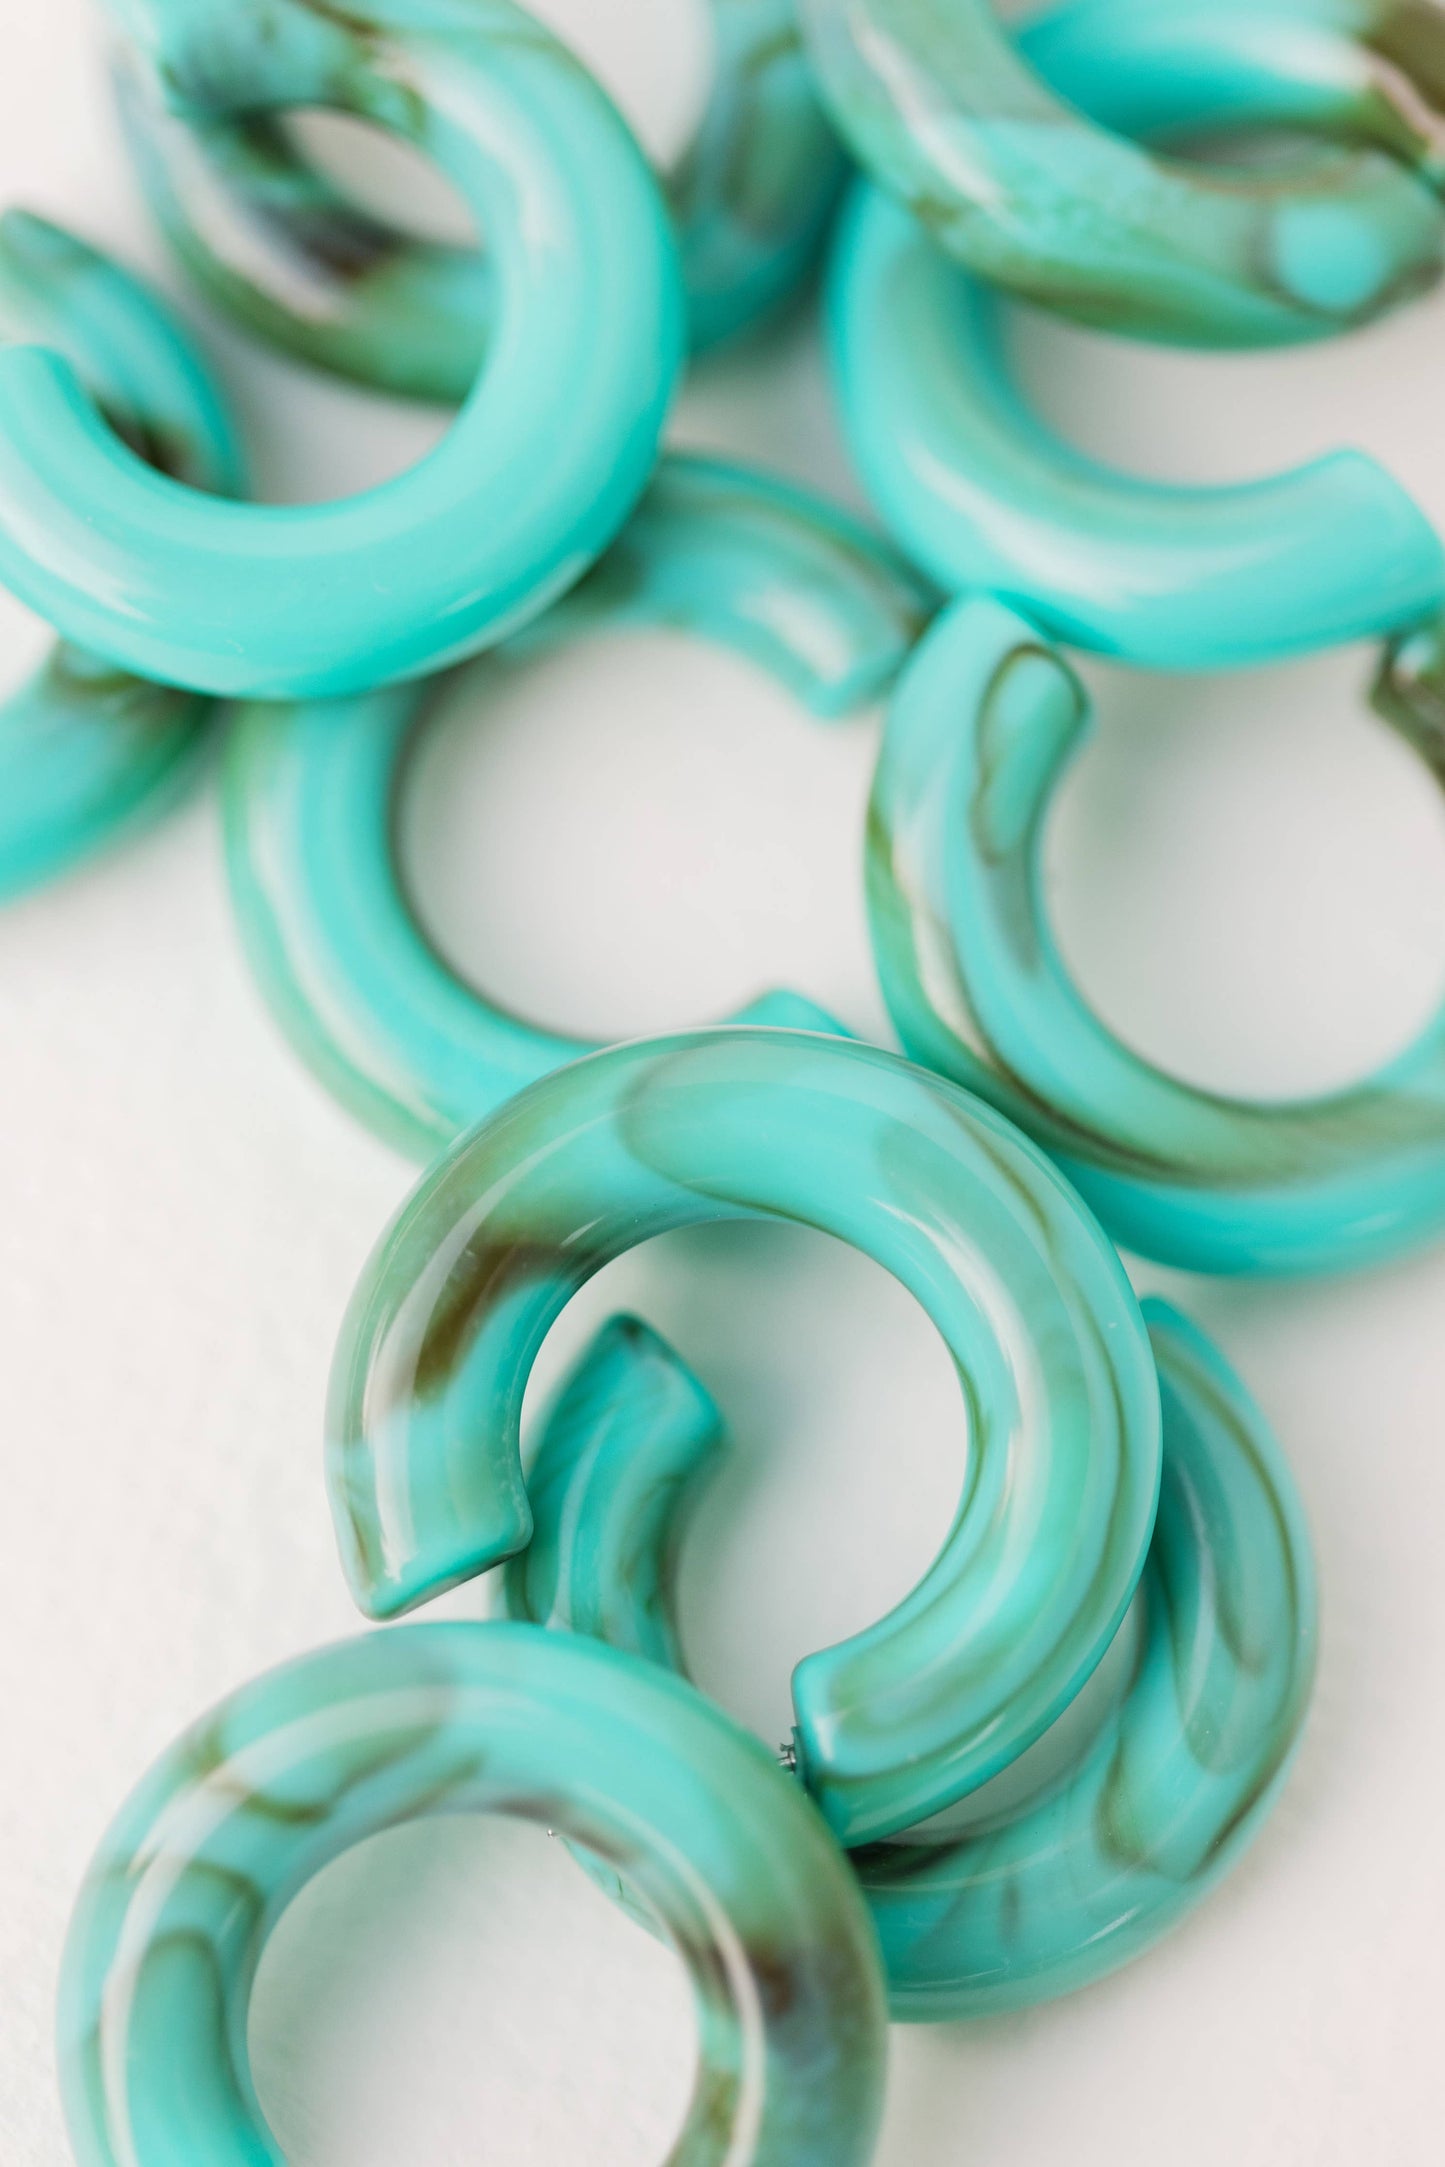 Turquoise Chunky Lucite Statement Hoop Earrings